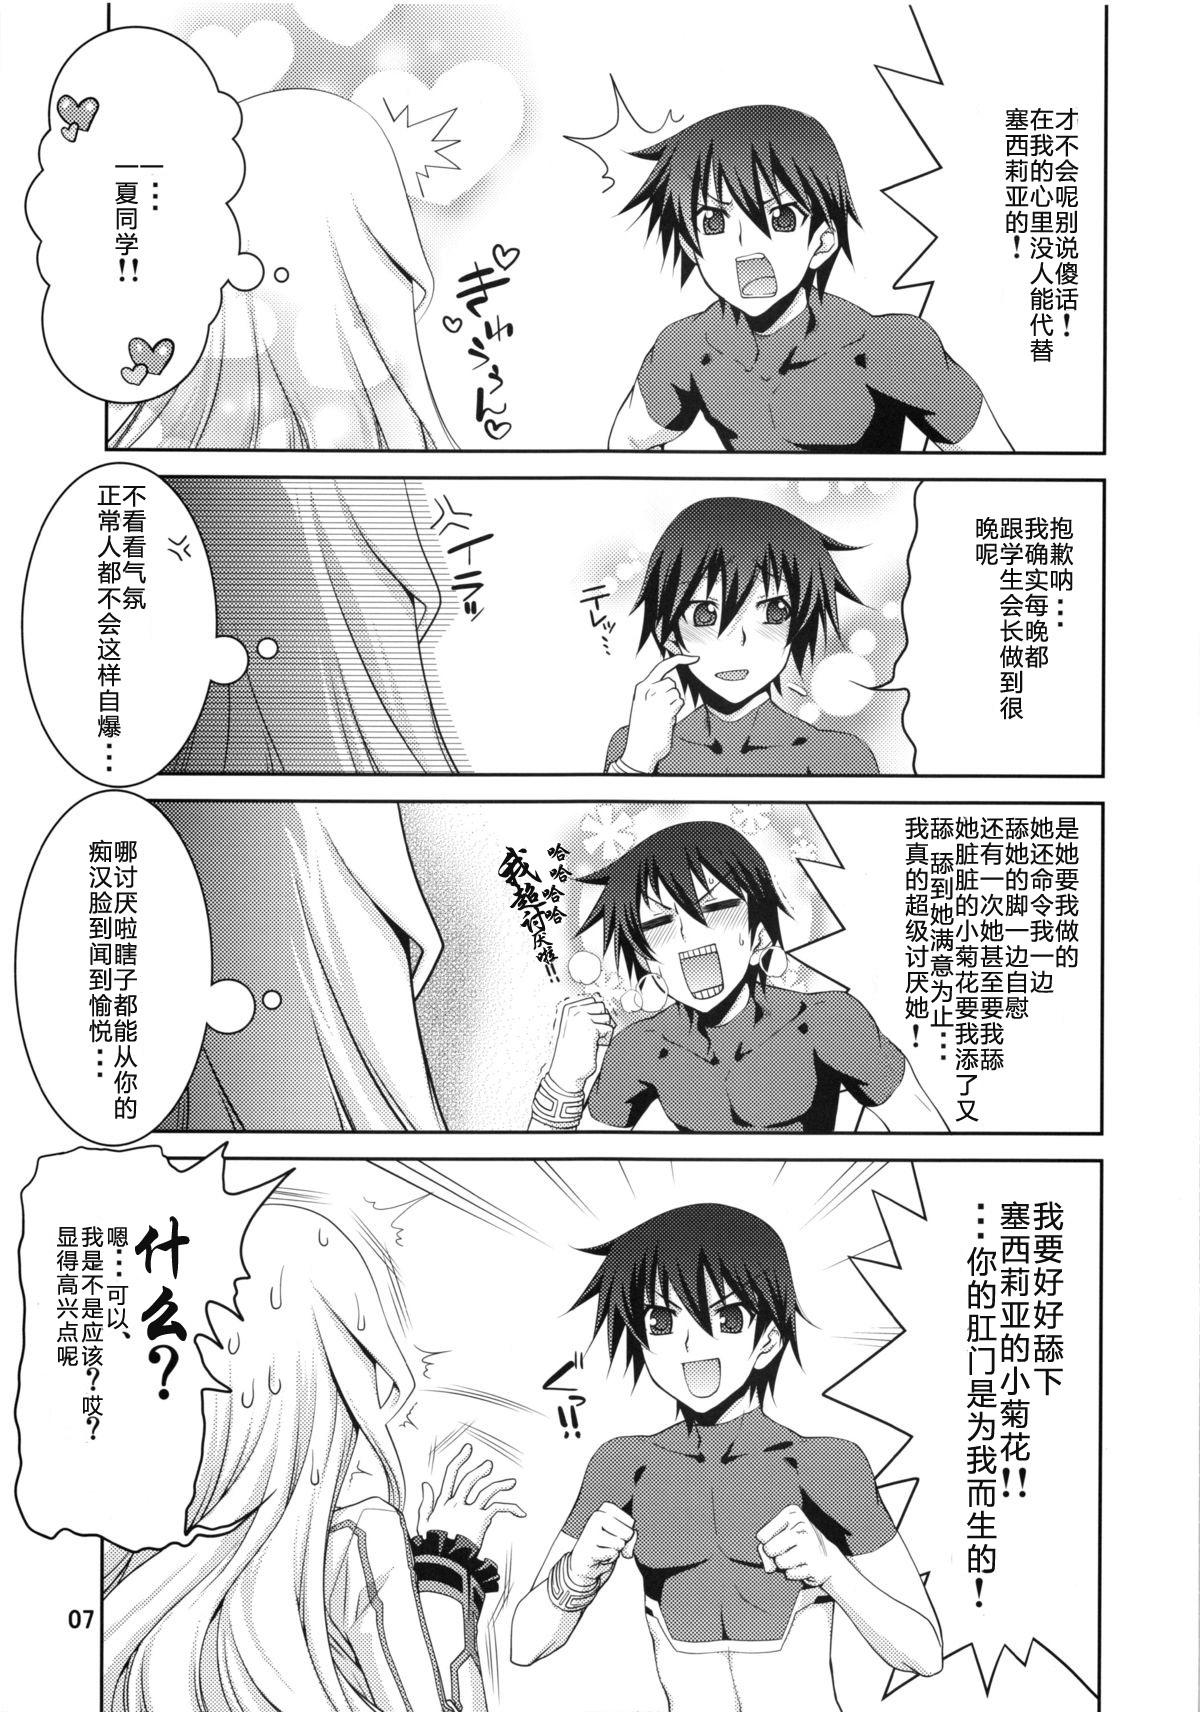 Oldyoung IS 2 - Infinite stratos Bang Bros - Page 6